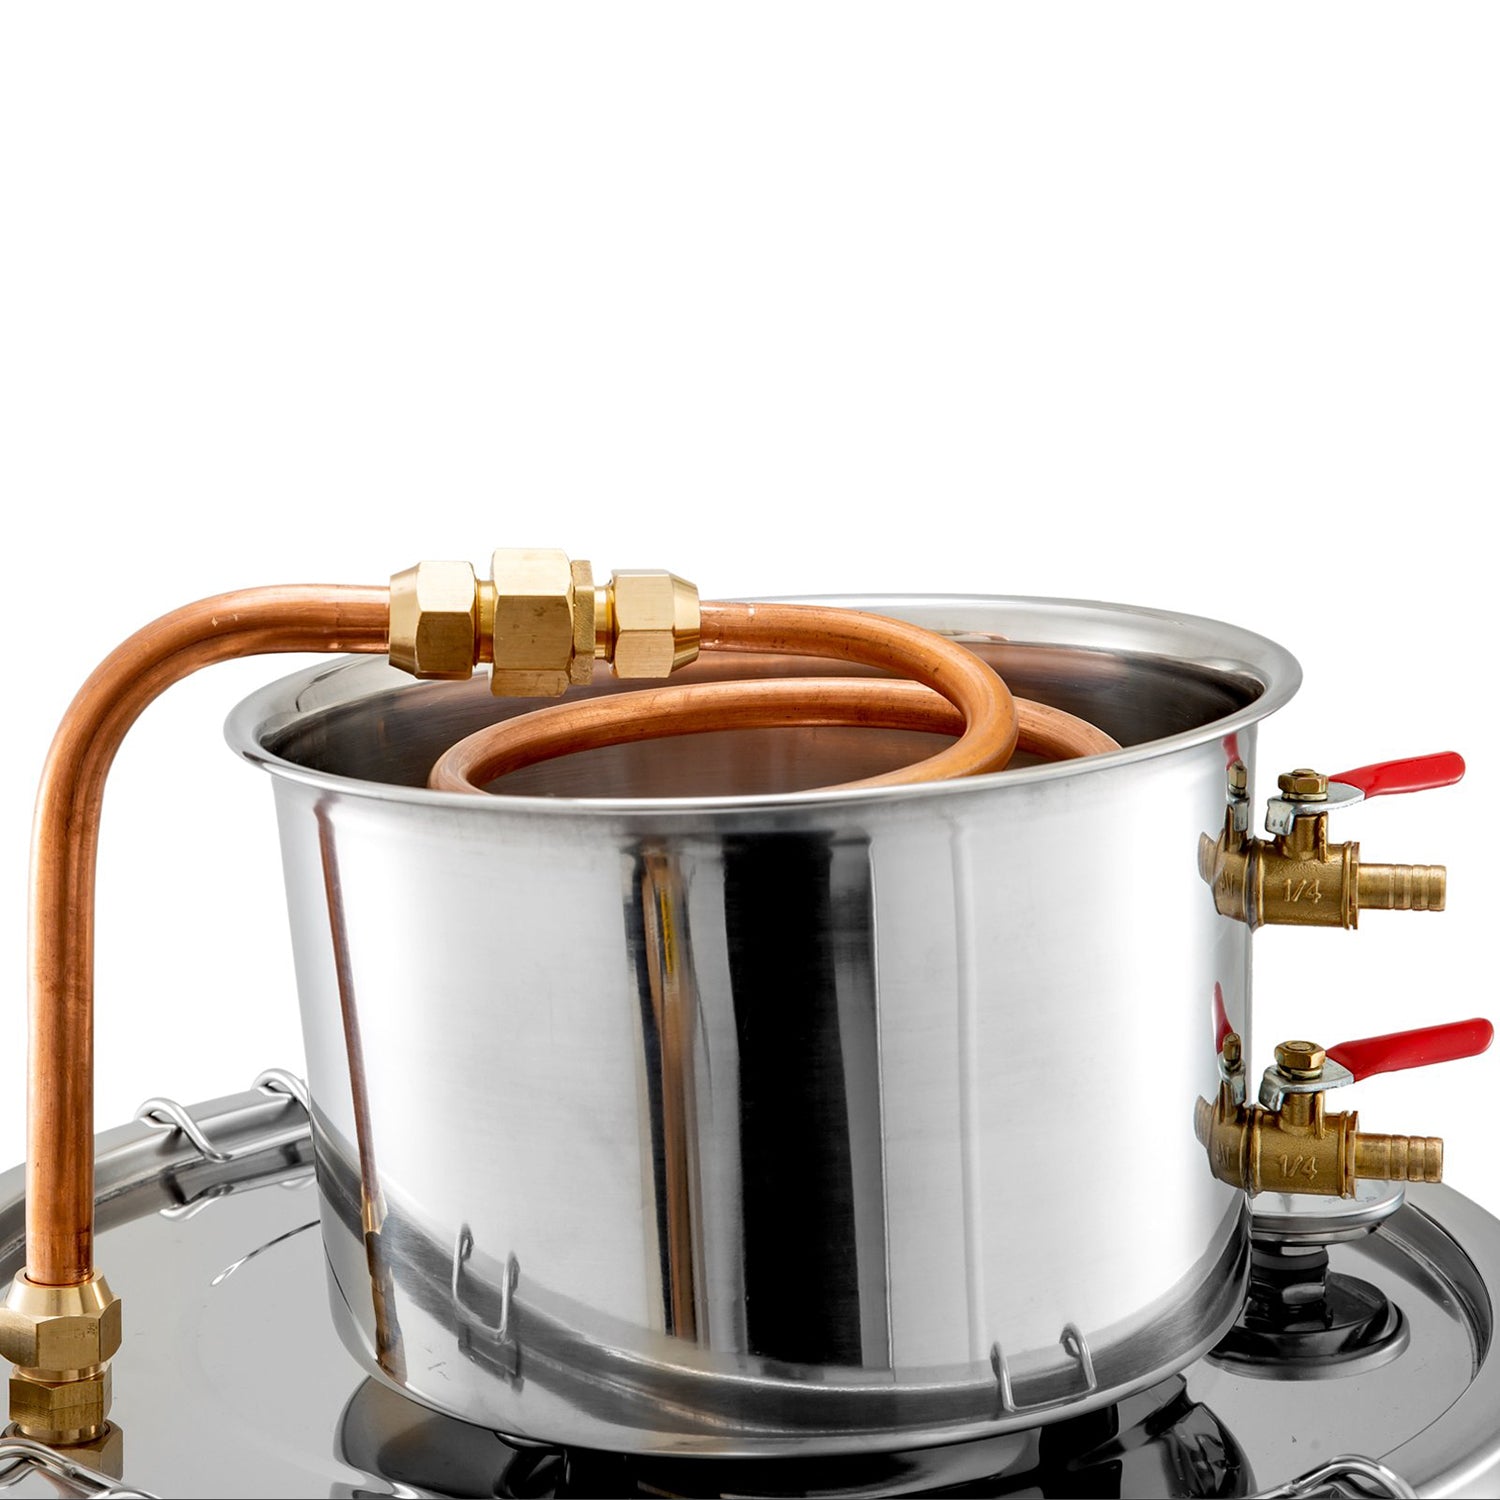 A-FCSA2-10 Alcohol Wine Distiller | 2.5 Gallon 10L | Moonshine Still with Copper Pipe | Stainless Steel